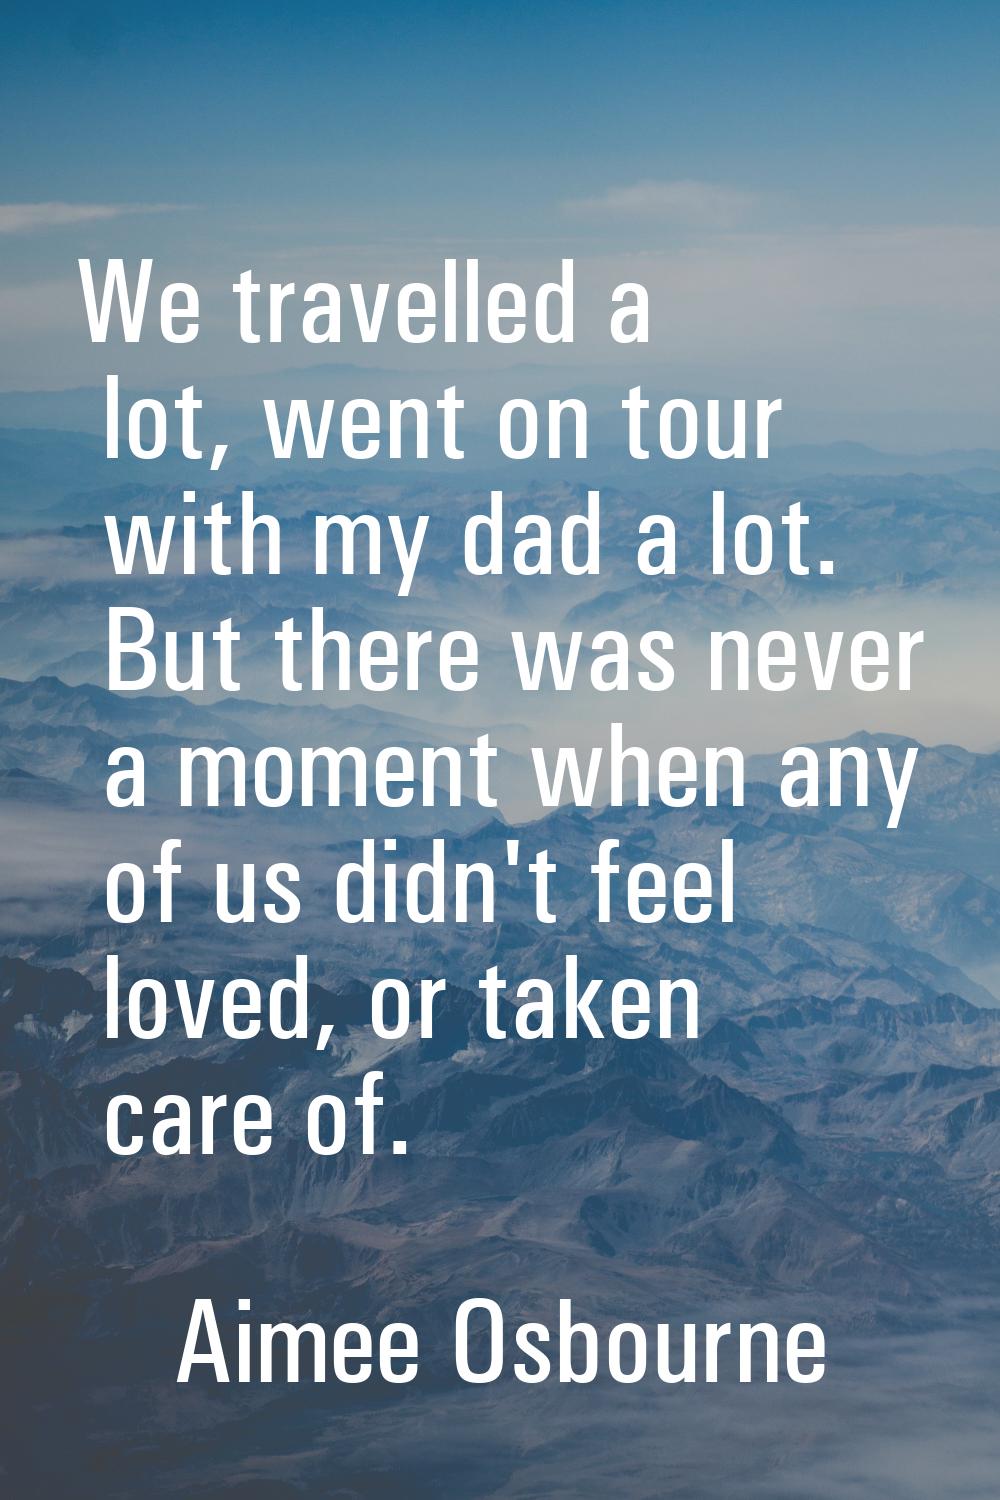 We travelled a lot, went on tour with my dad a lot. But there was never a moment when any of us did